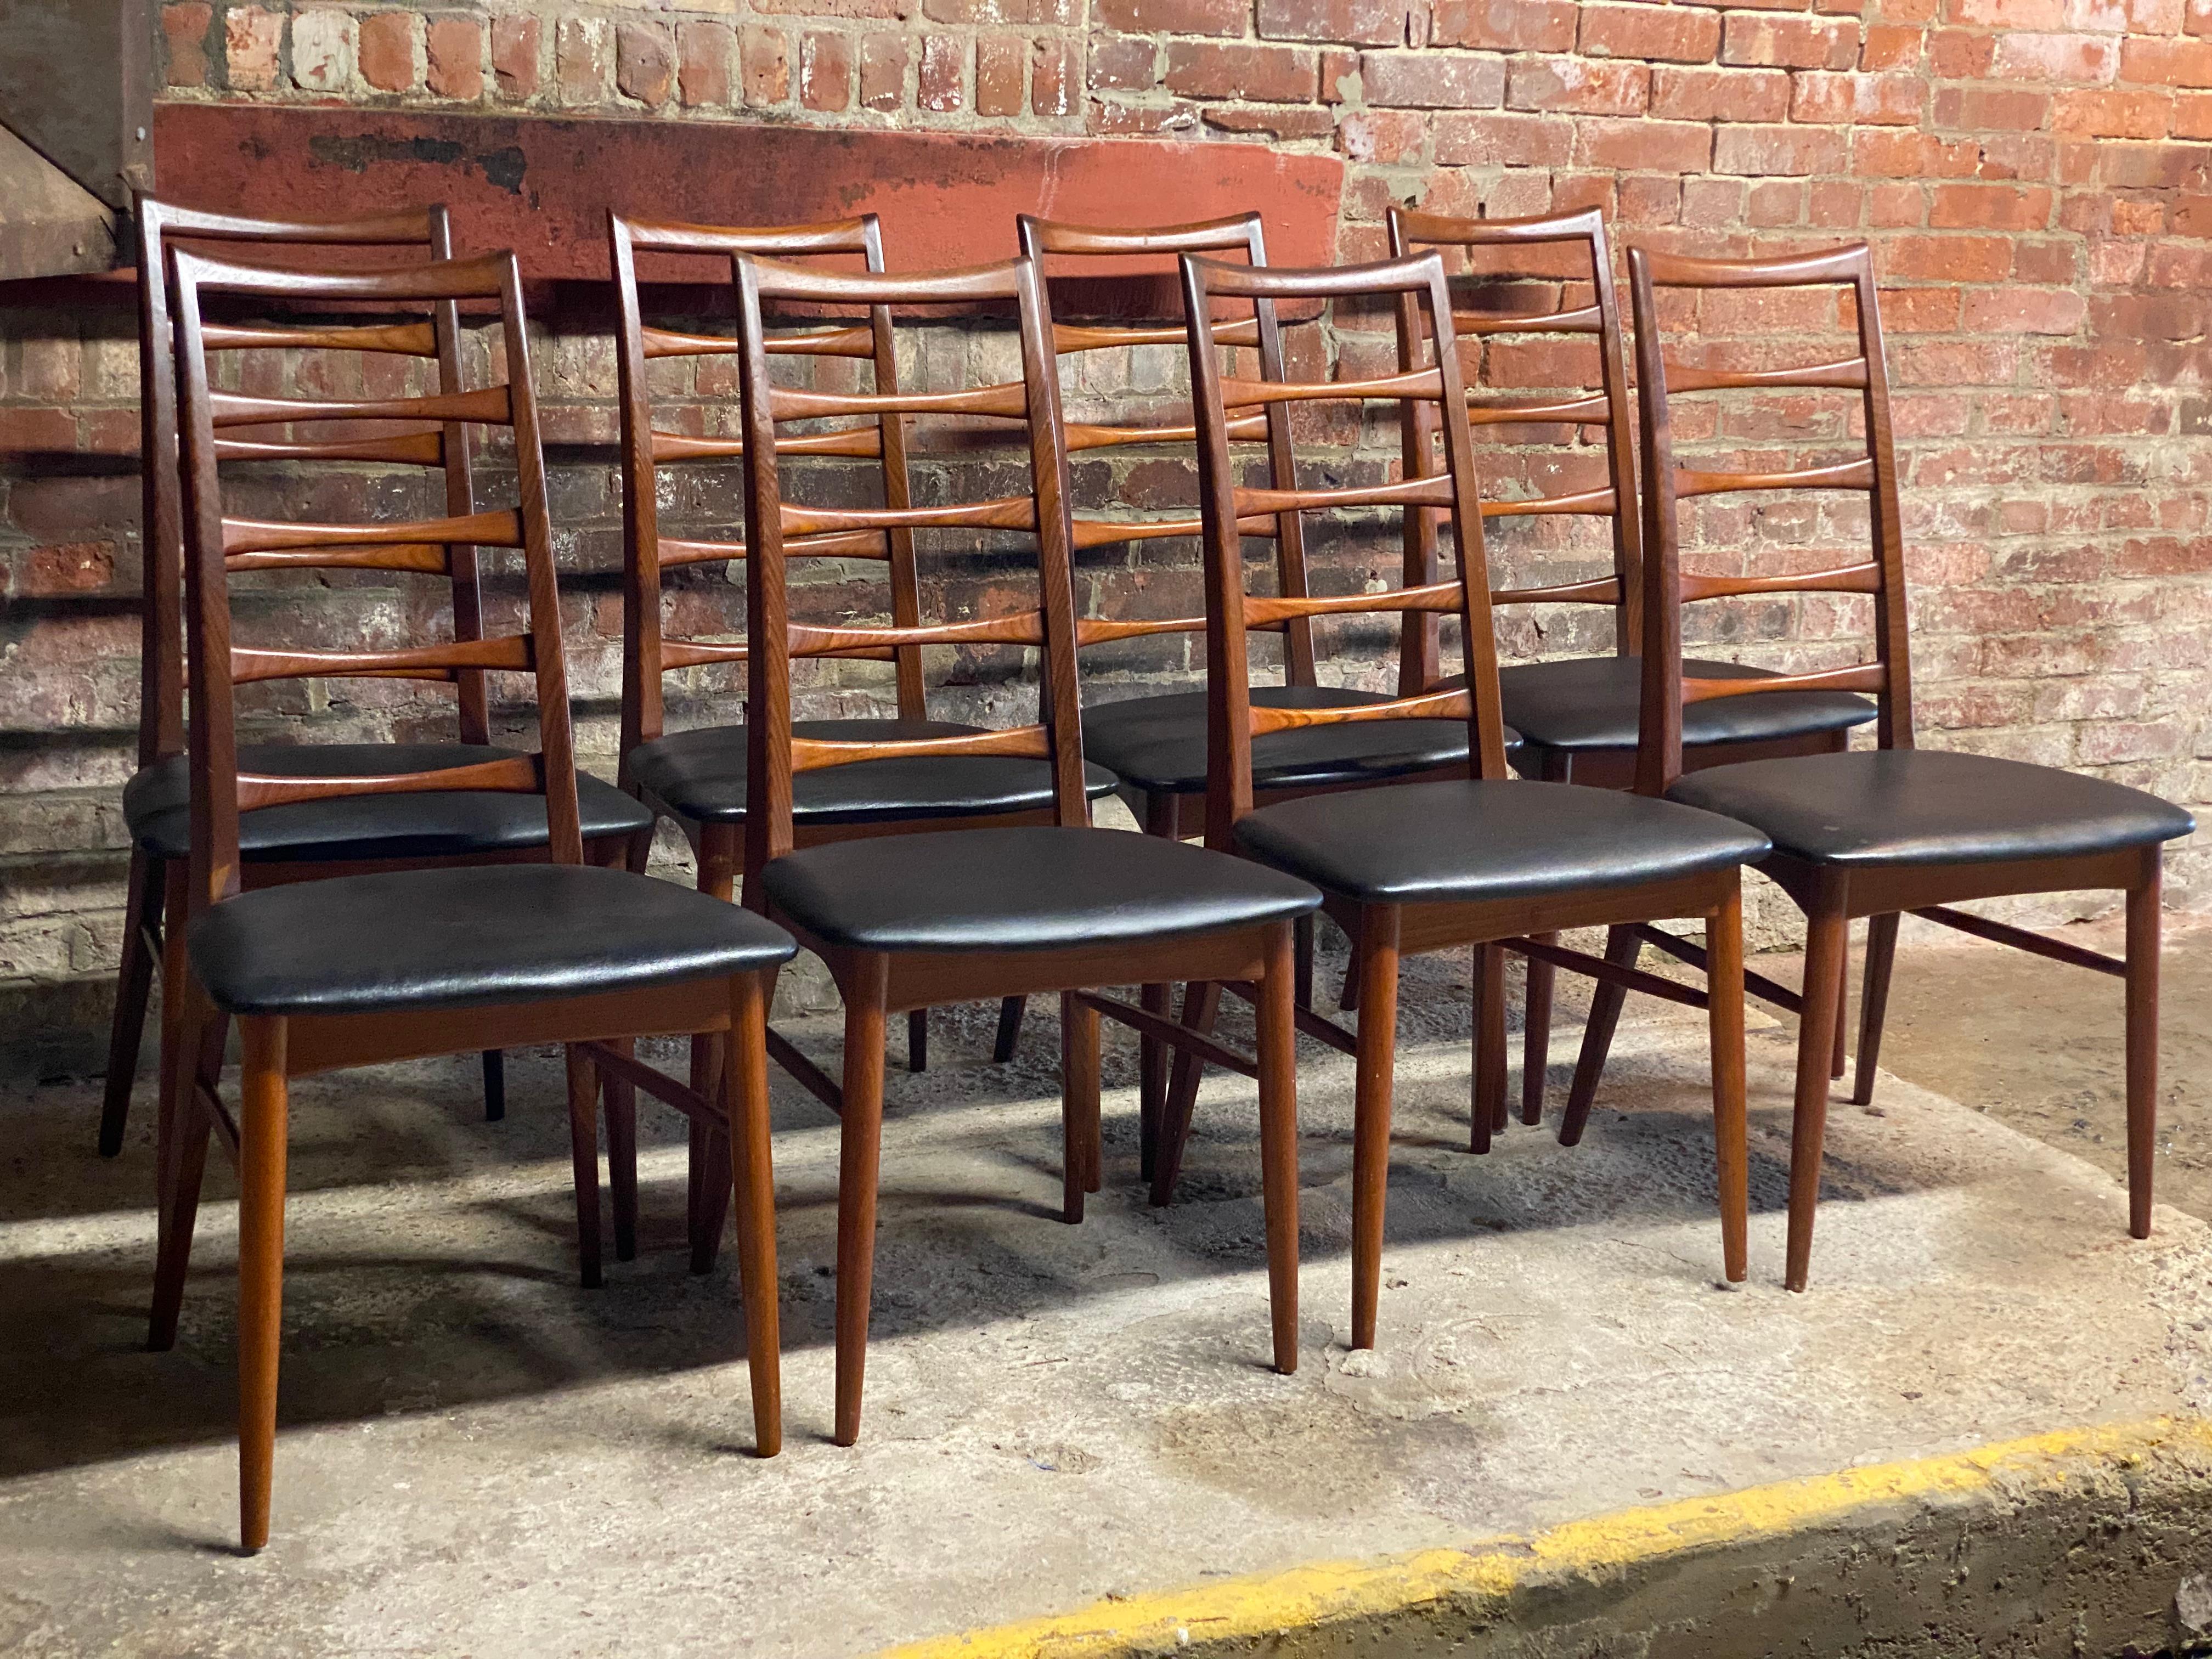 Koefoed Hornslet Lis Chairs and Teak Dining Table 5